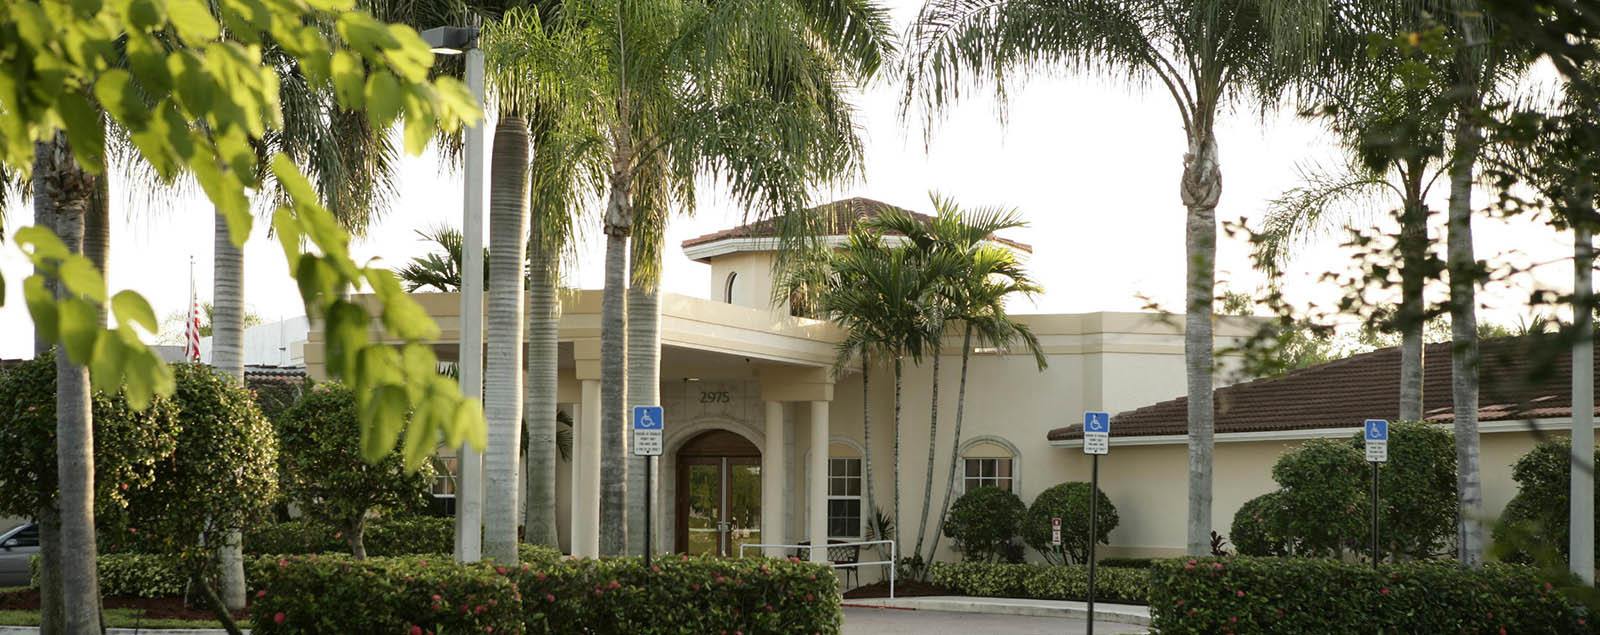 Map & directions to senior living in Coral Springs